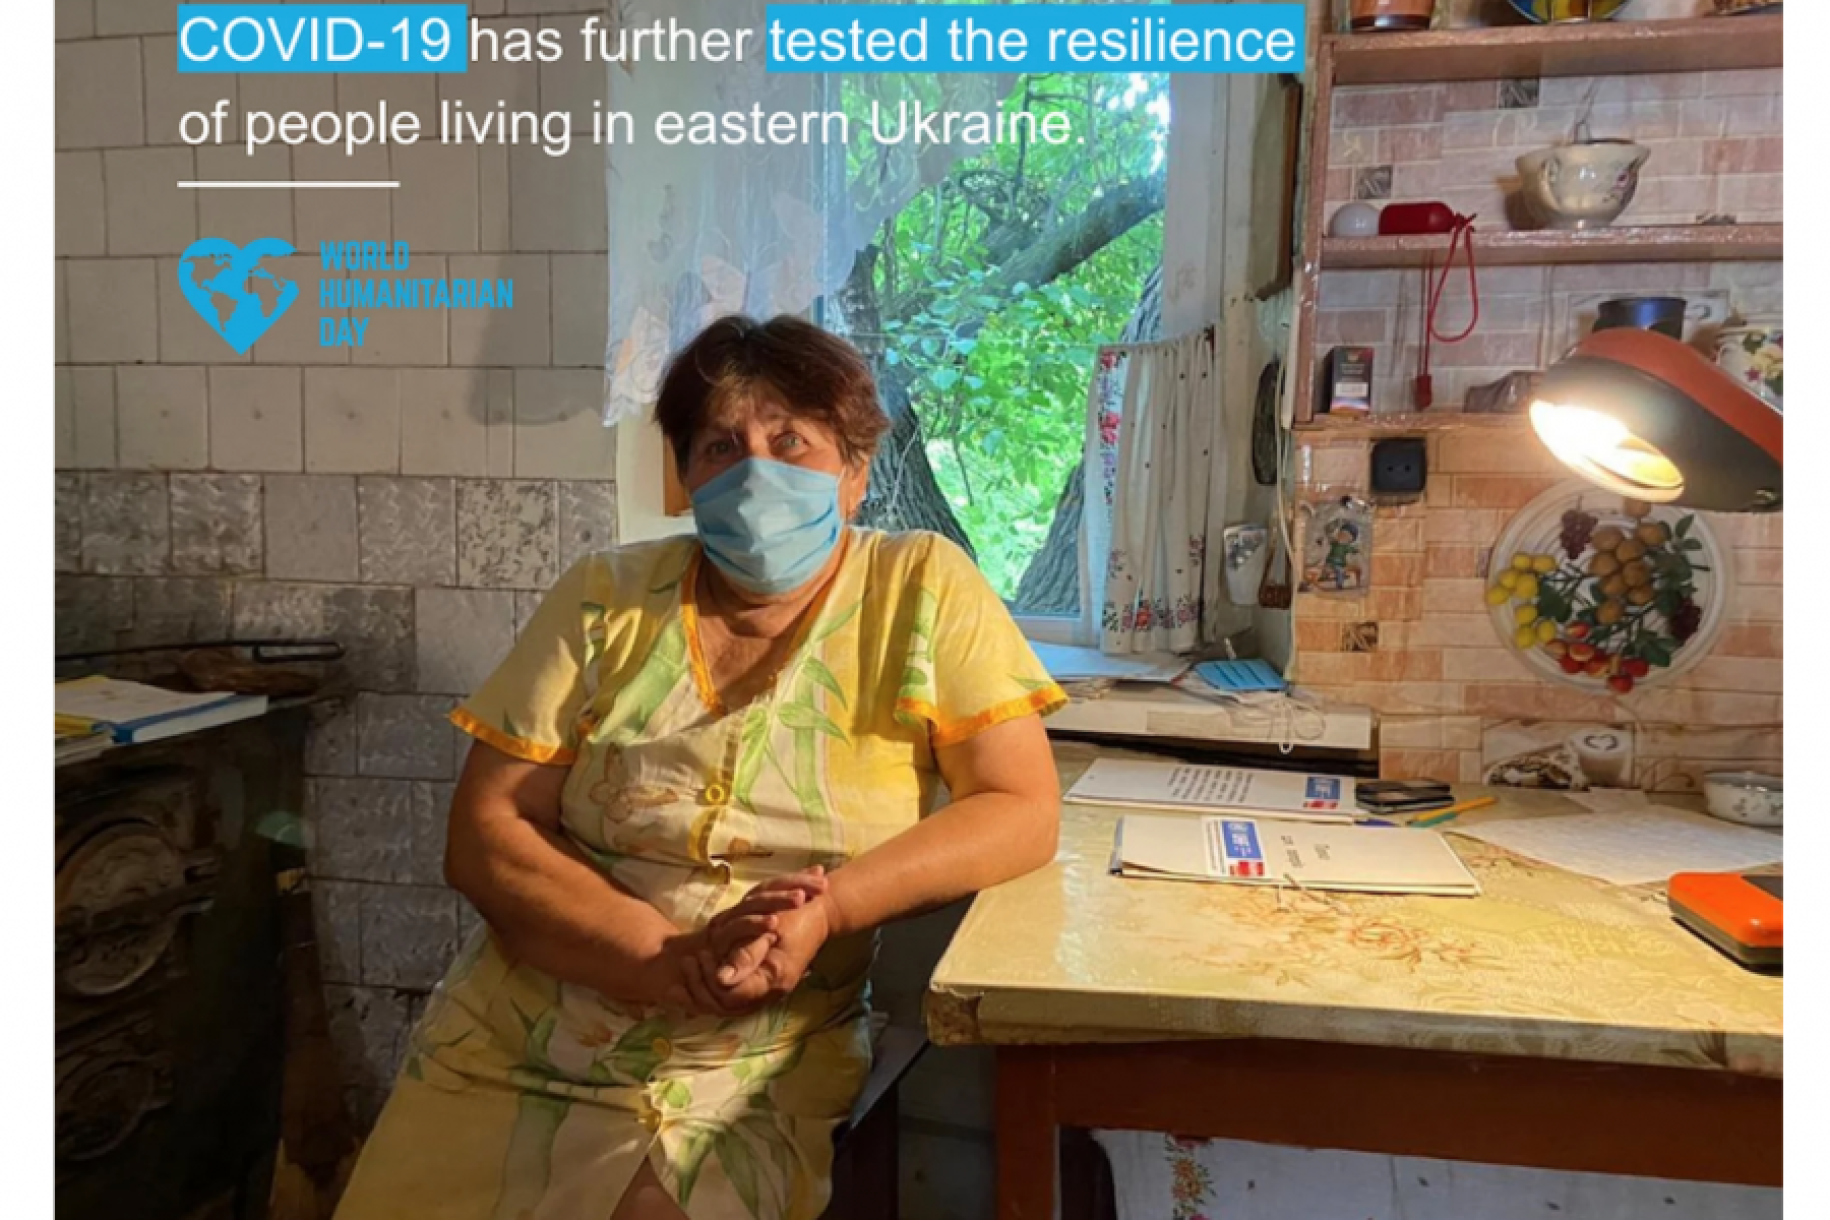 A woman wearing a face mask leans on her desk with a factoid above stating COVID-19 has tested the resilience of people living in eastern Ukraine.